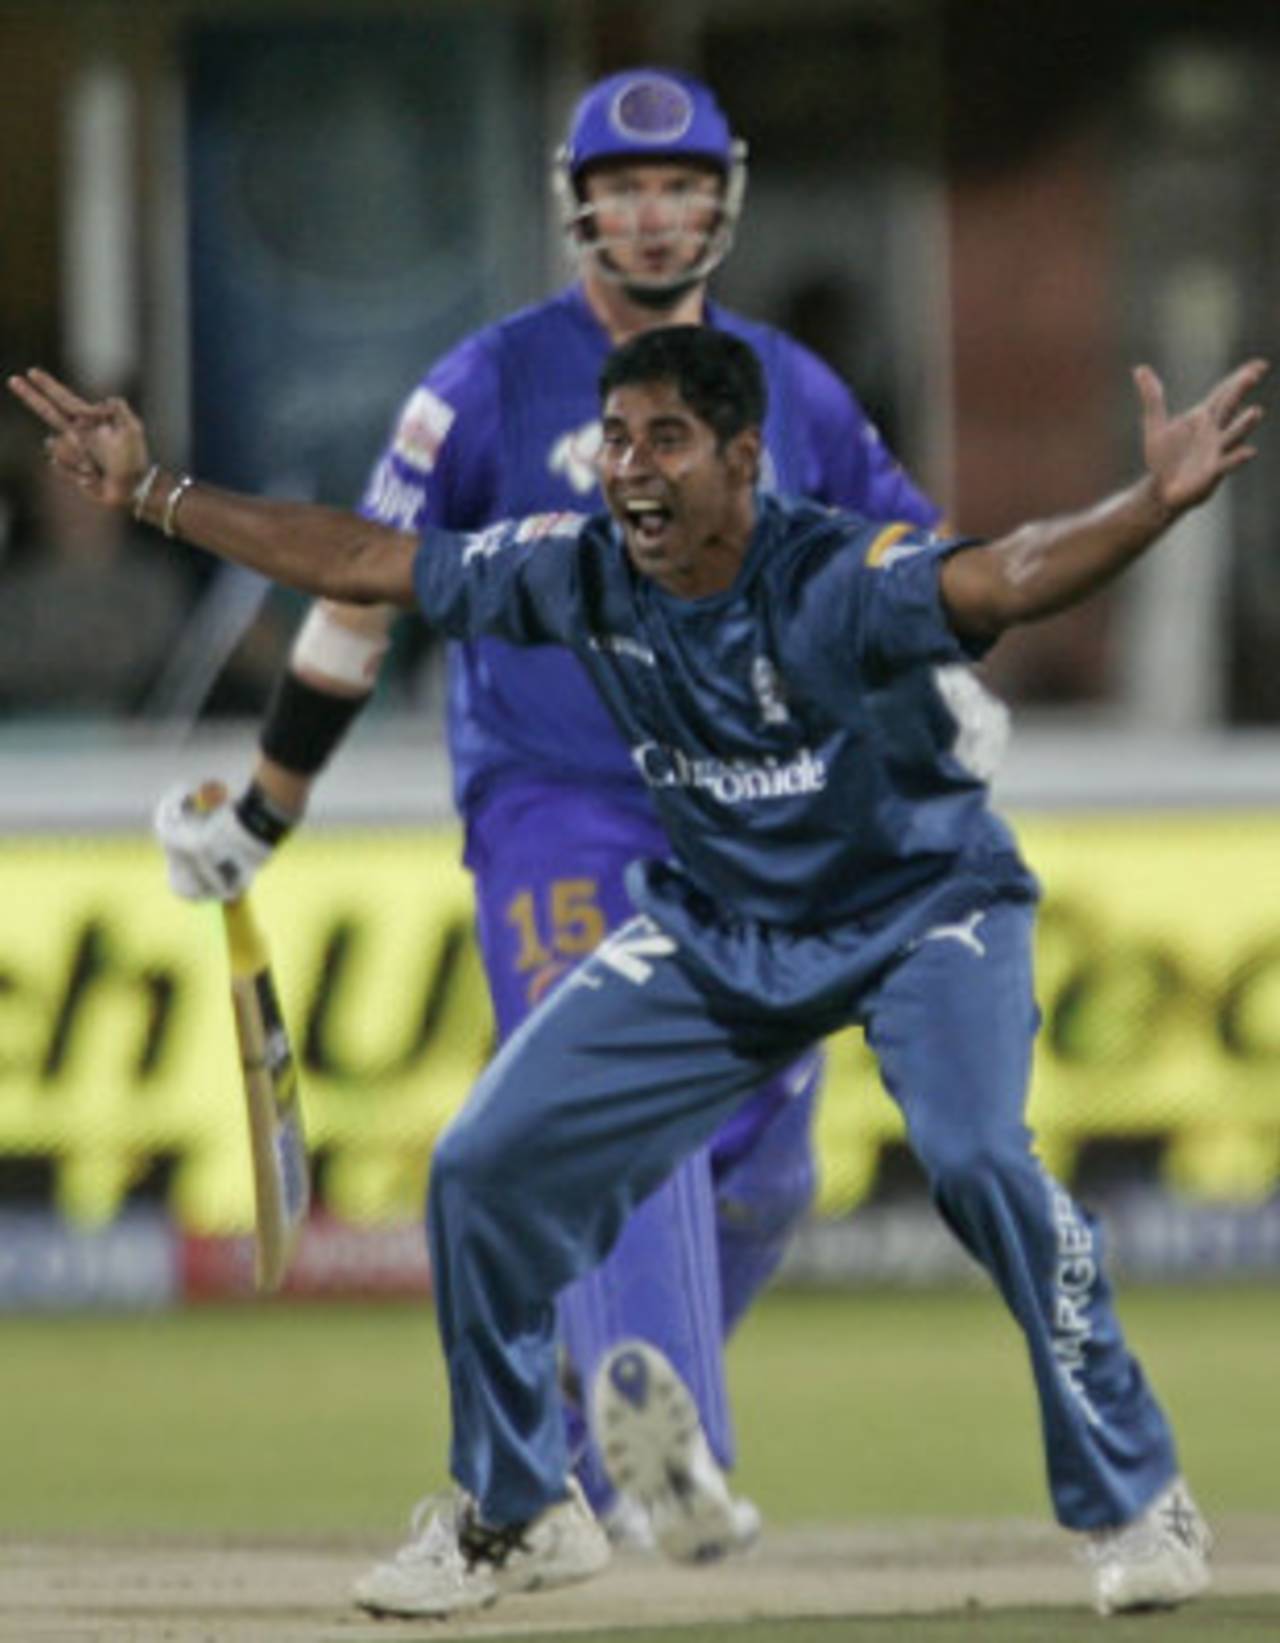 Chaminda Vaas trapped Graeme Smith lbw with his first delivery, Deccan Chargers v Rajasthan Royals, IPL, 40th match, Kimberley, May 11, 2009